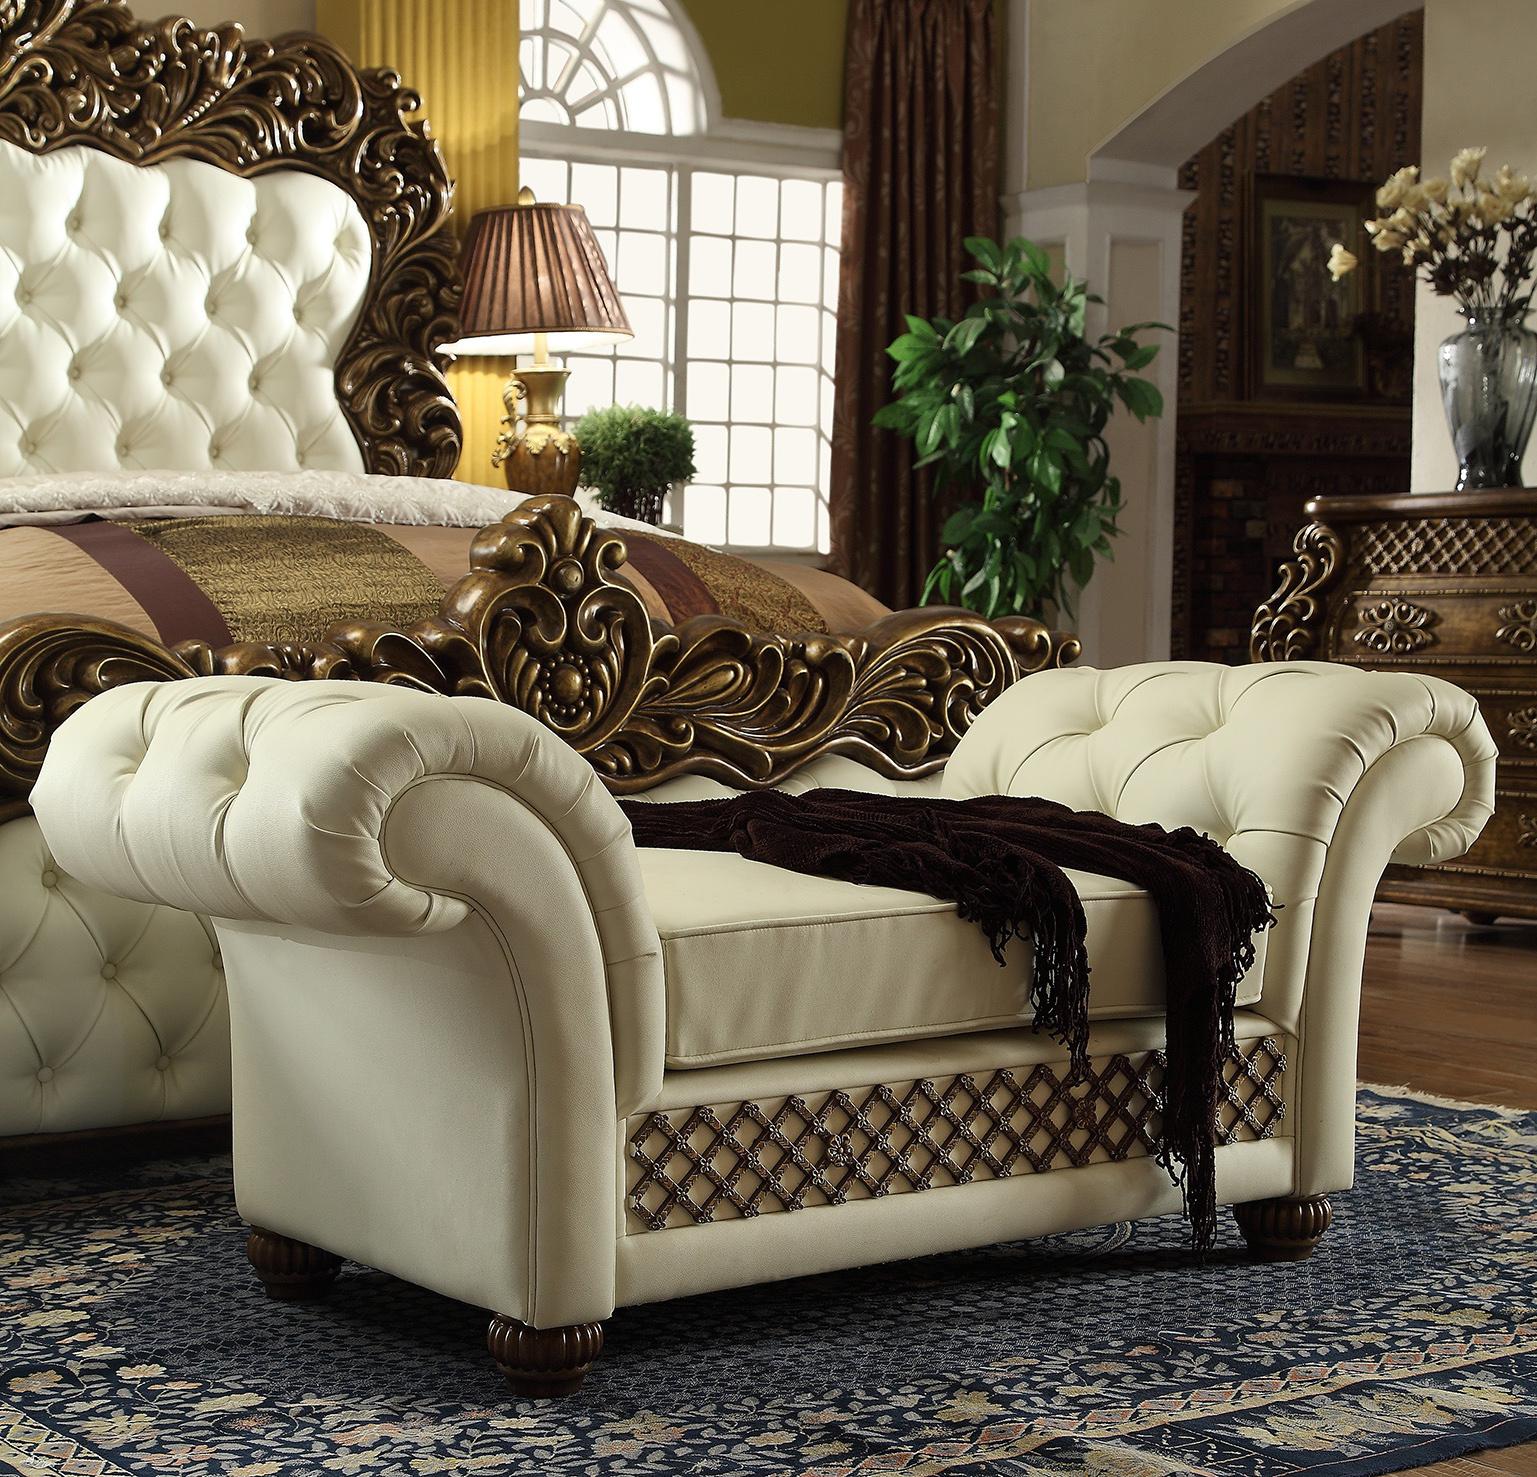 Traditional Bench HD-8011 HD-8011 BENCH in Cream Leather